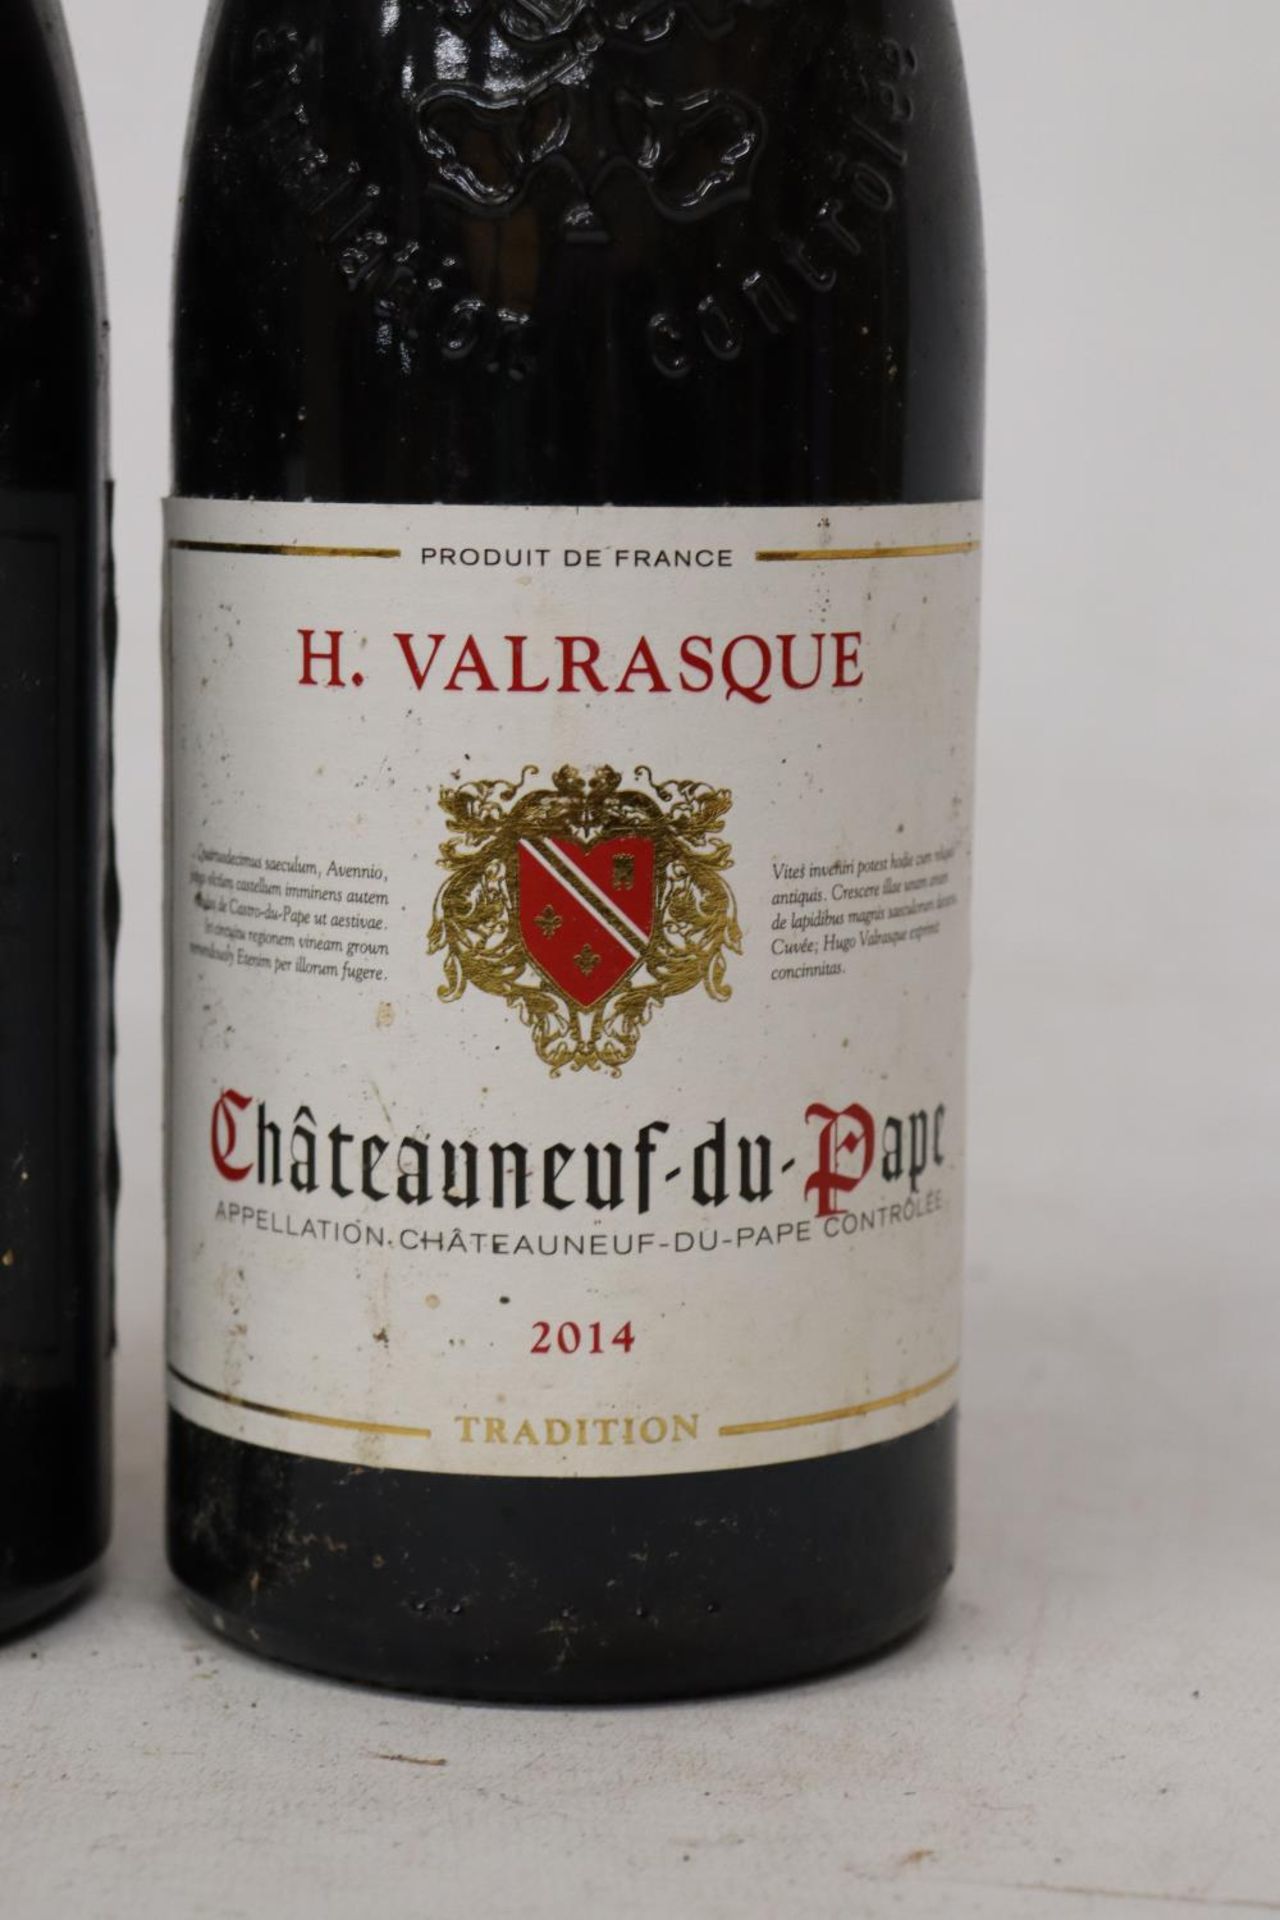 TWO BOTTLES OF H. VALRASQUE CHATEAUNEUF-DU-PAPE 2014 RED WINE - Image 4 of 4